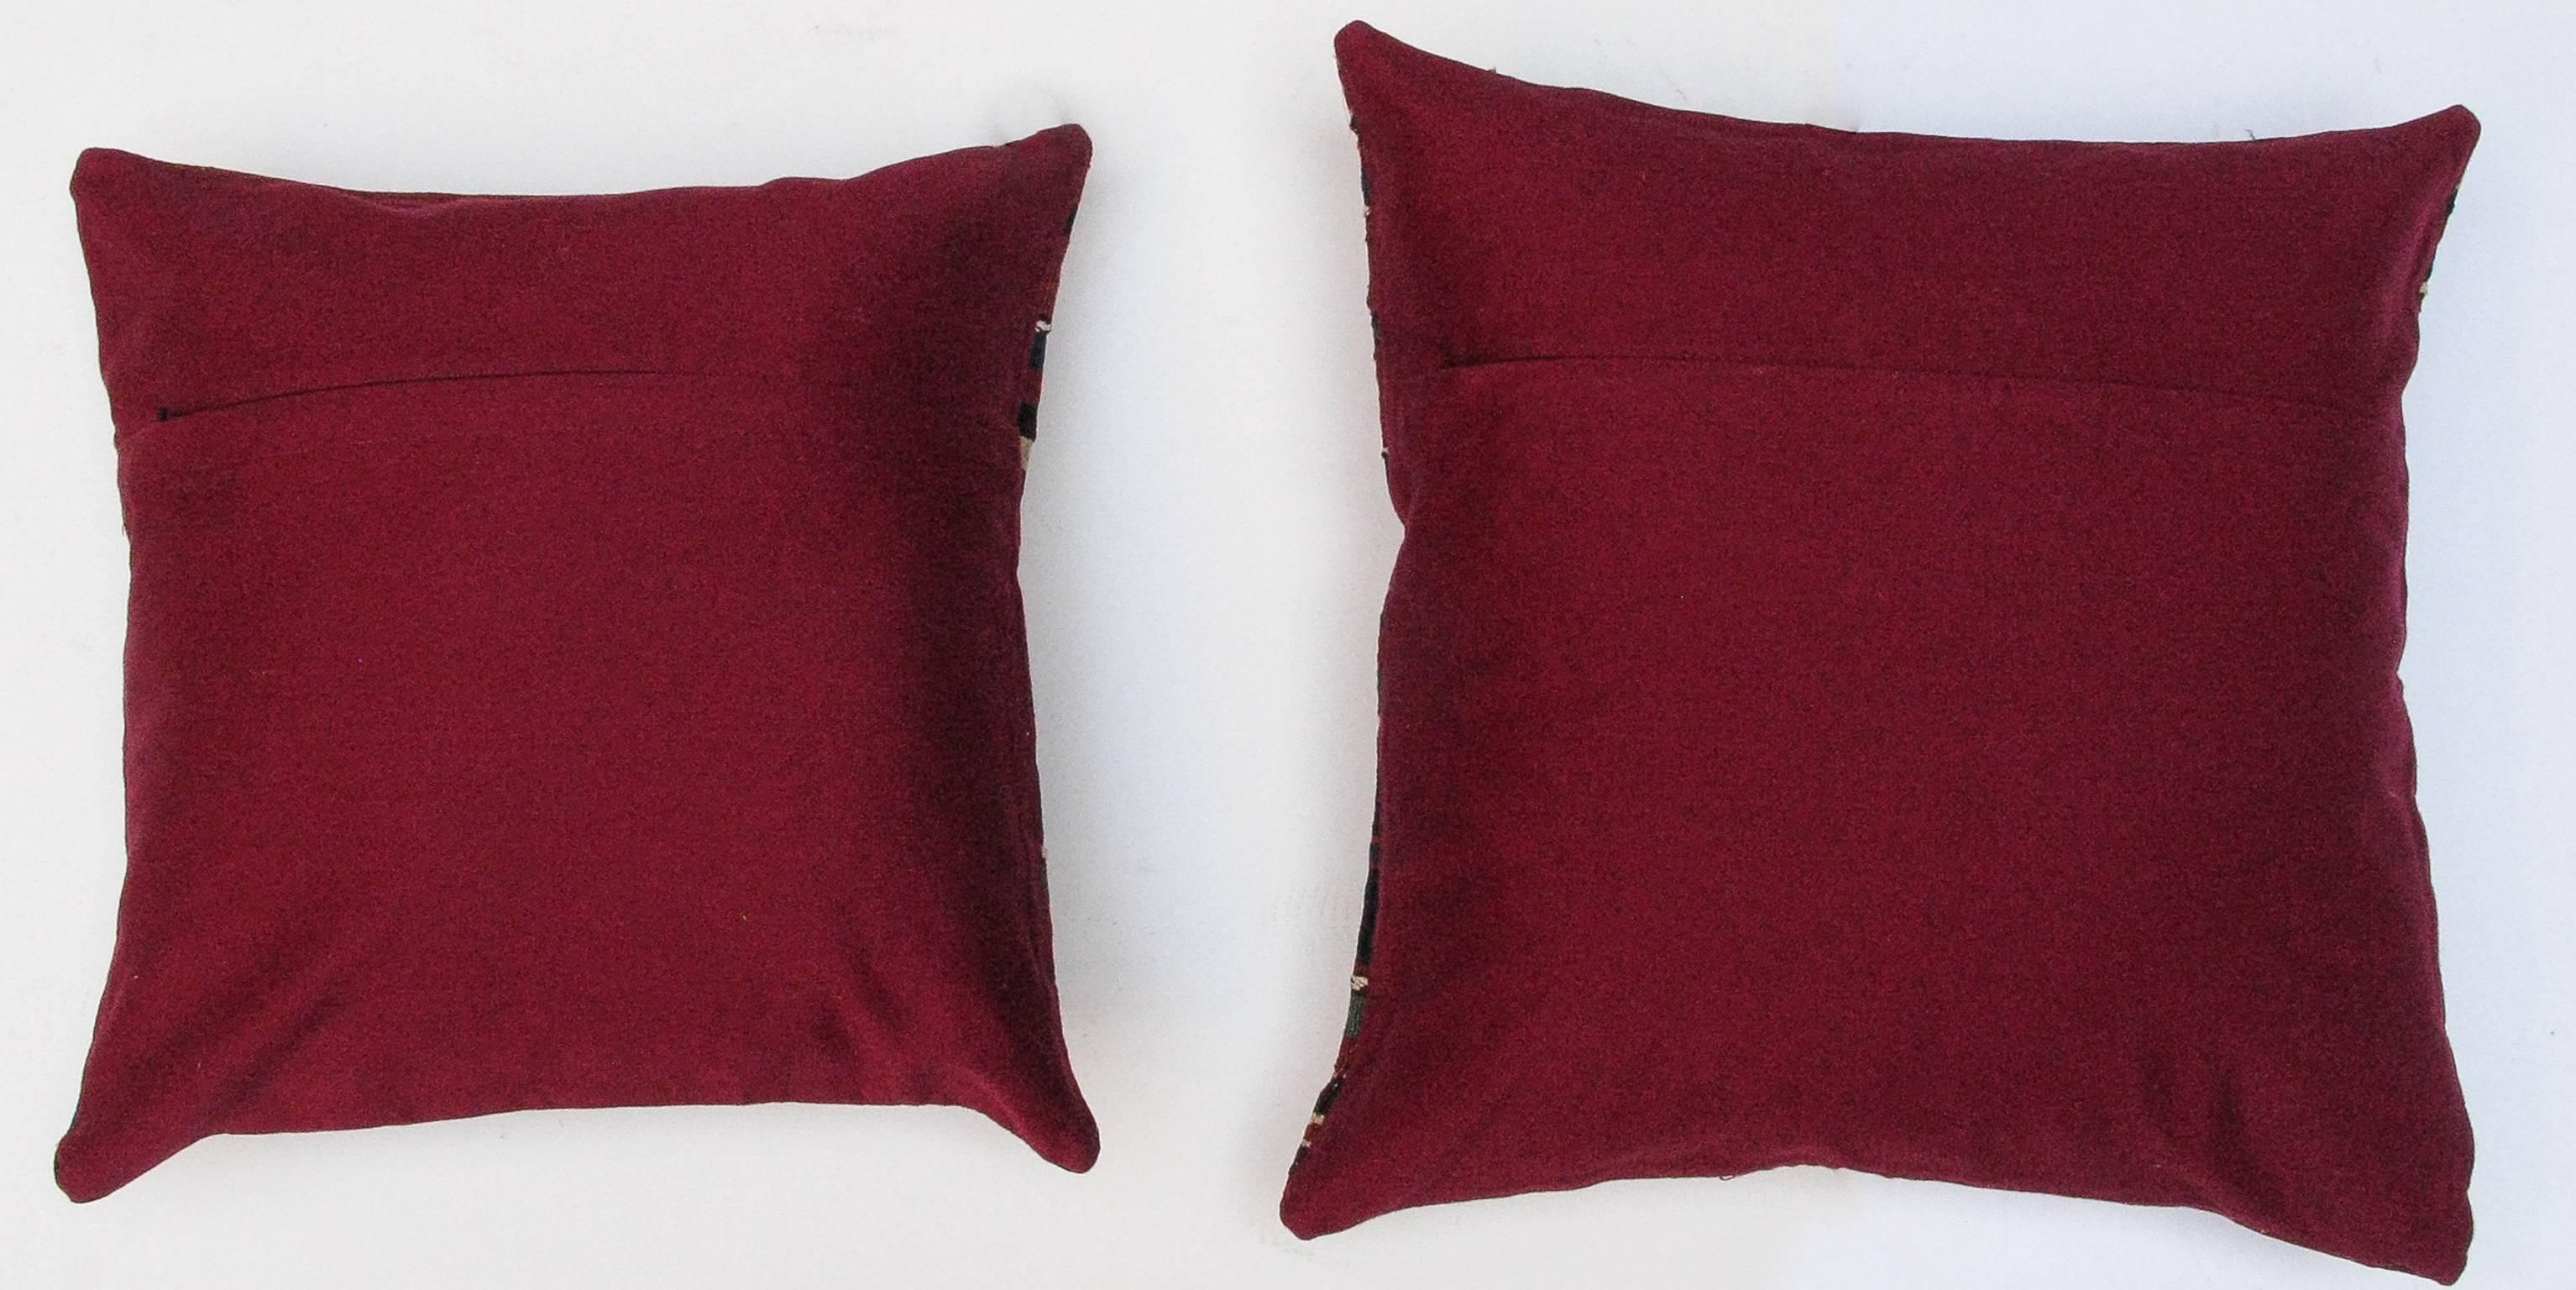 nr. 114 /3 - 7 .
Set of  pillows made with a rare fragment of a Shahsavan Caucasian Kilim, not an usual kilim ! very interesting...
In a modern home they give an impression of character.